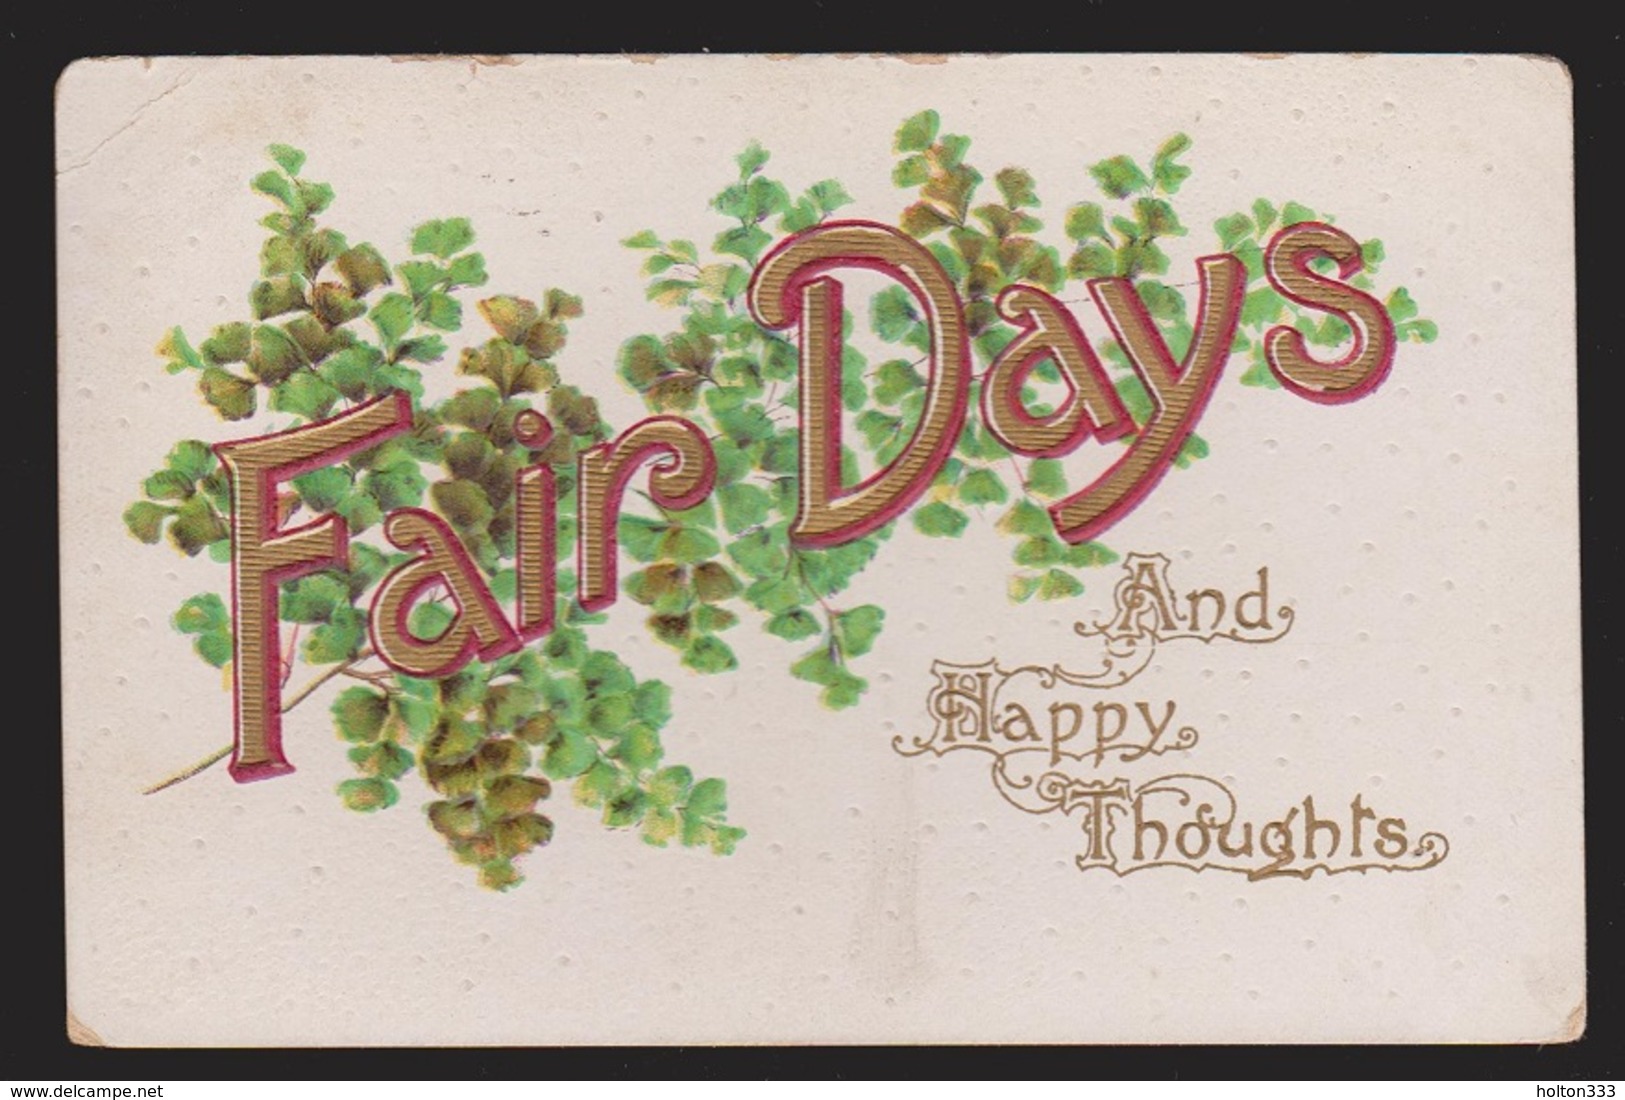 General Greetings - Fair Days & Happy Thoughts - Used 1912 - Embossed - Greetings From...